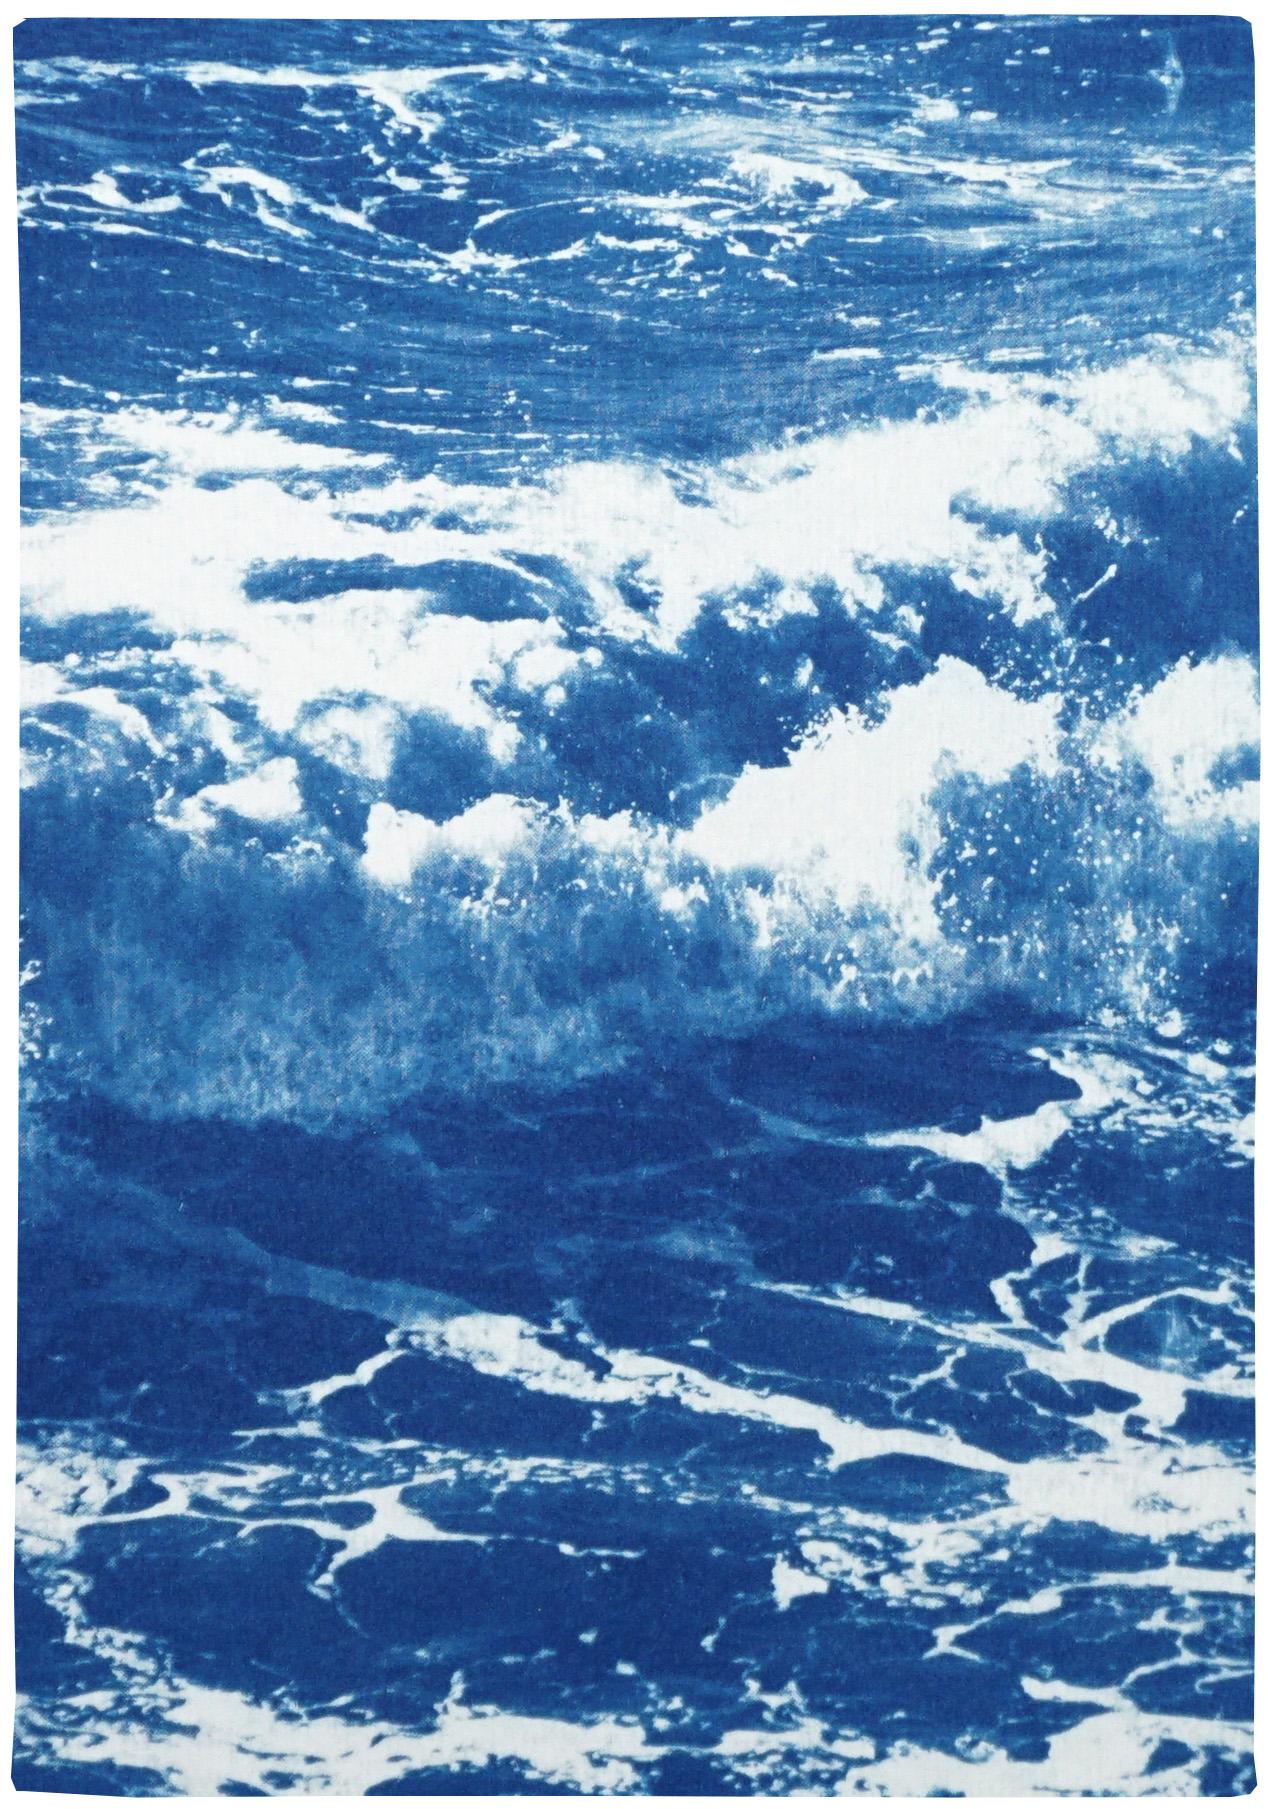 Australian Rolling Waves, Nautical Triptych of Vigorous Coast, Large Seascape - Blue Landscape Painting by Kind of Cyan